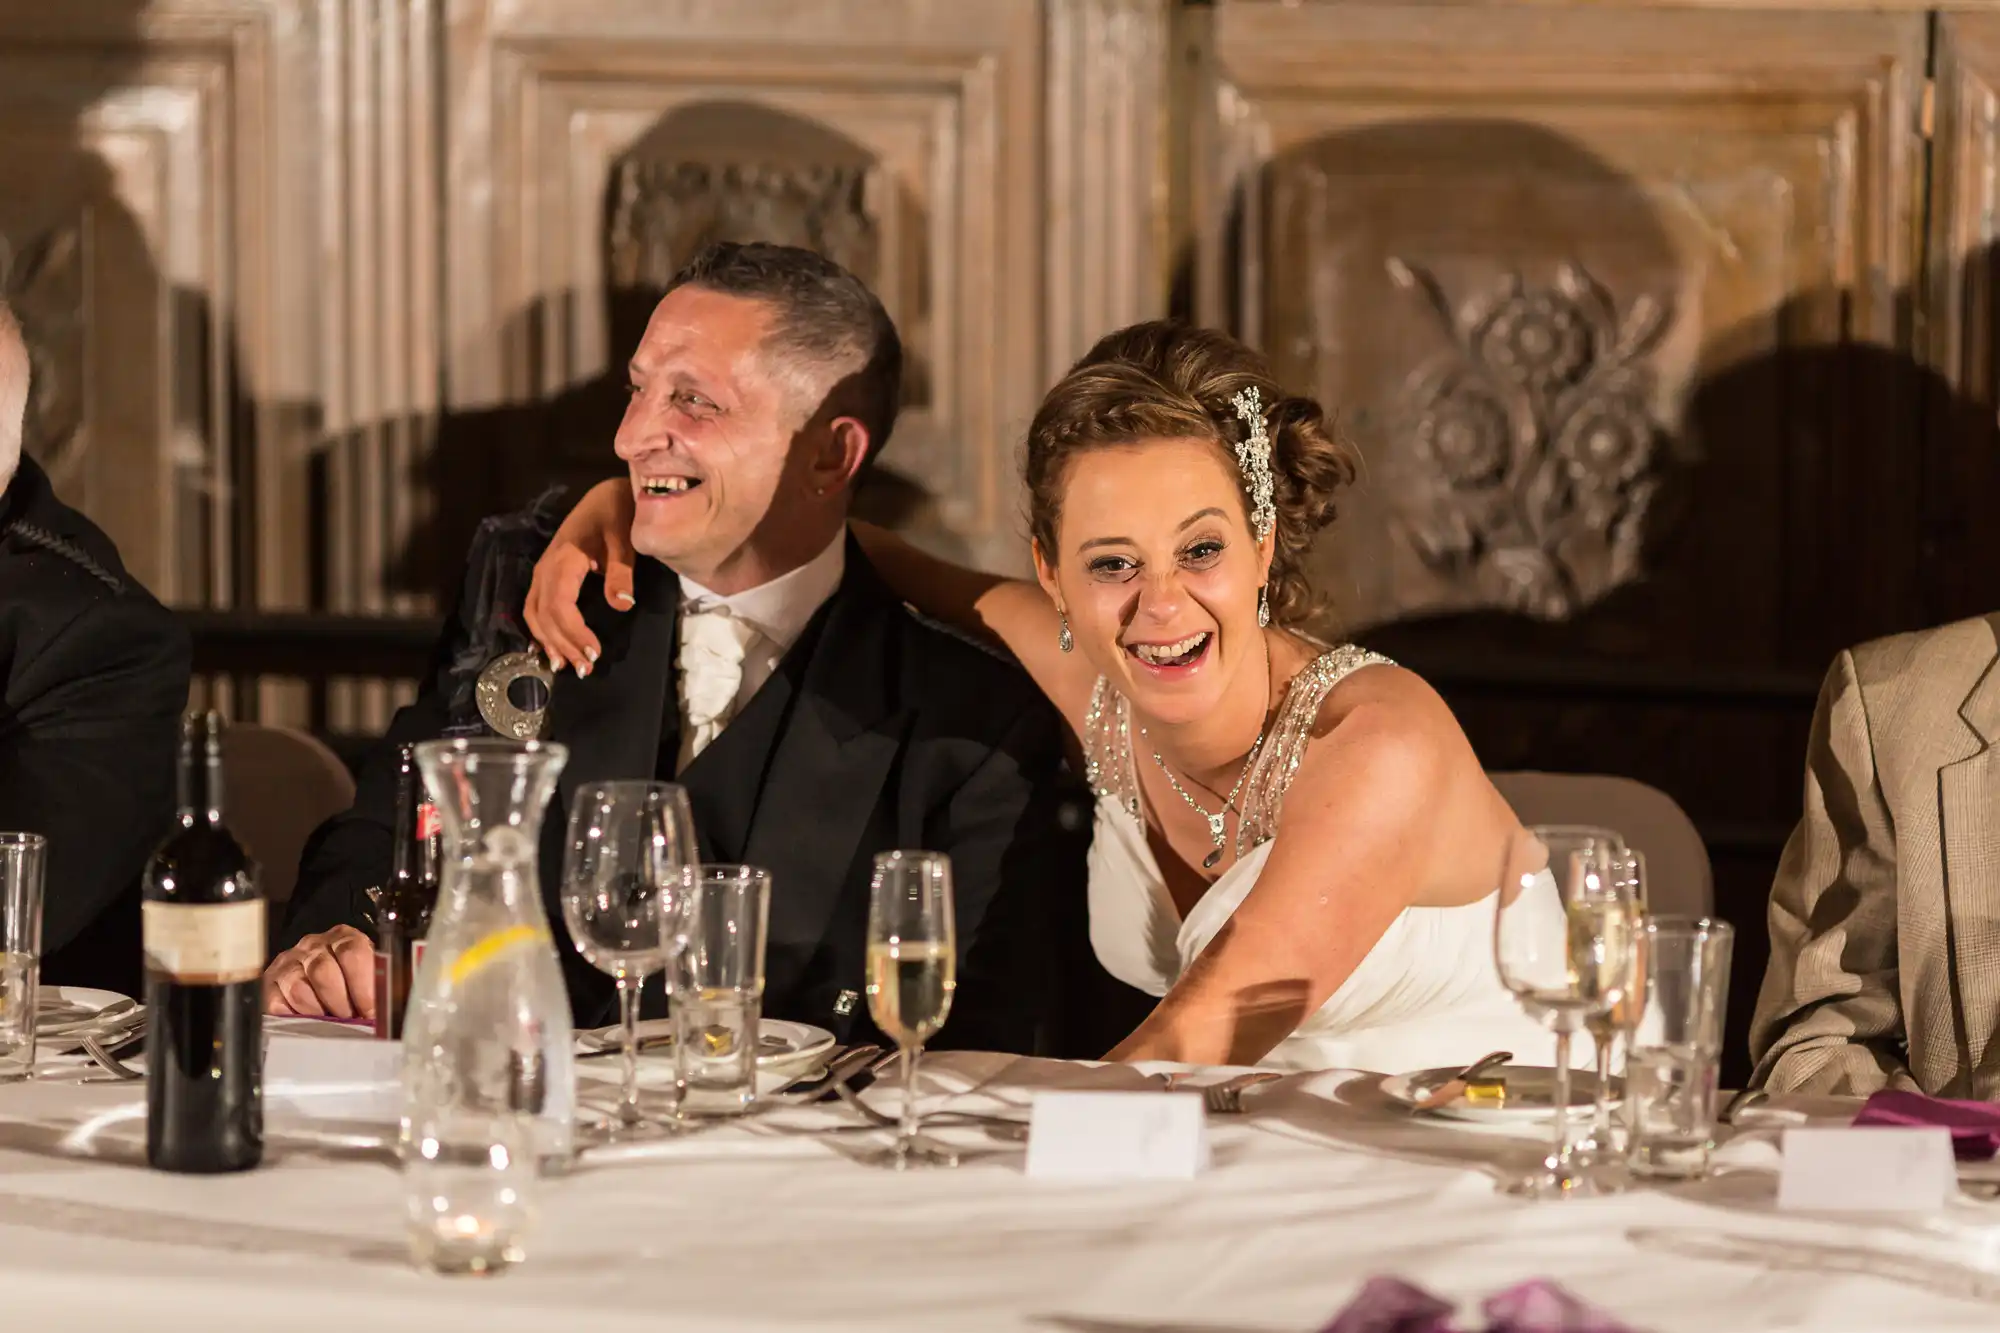 A bride and groom laughing at a wedding reception table, surrounded by wine glasses and decor.